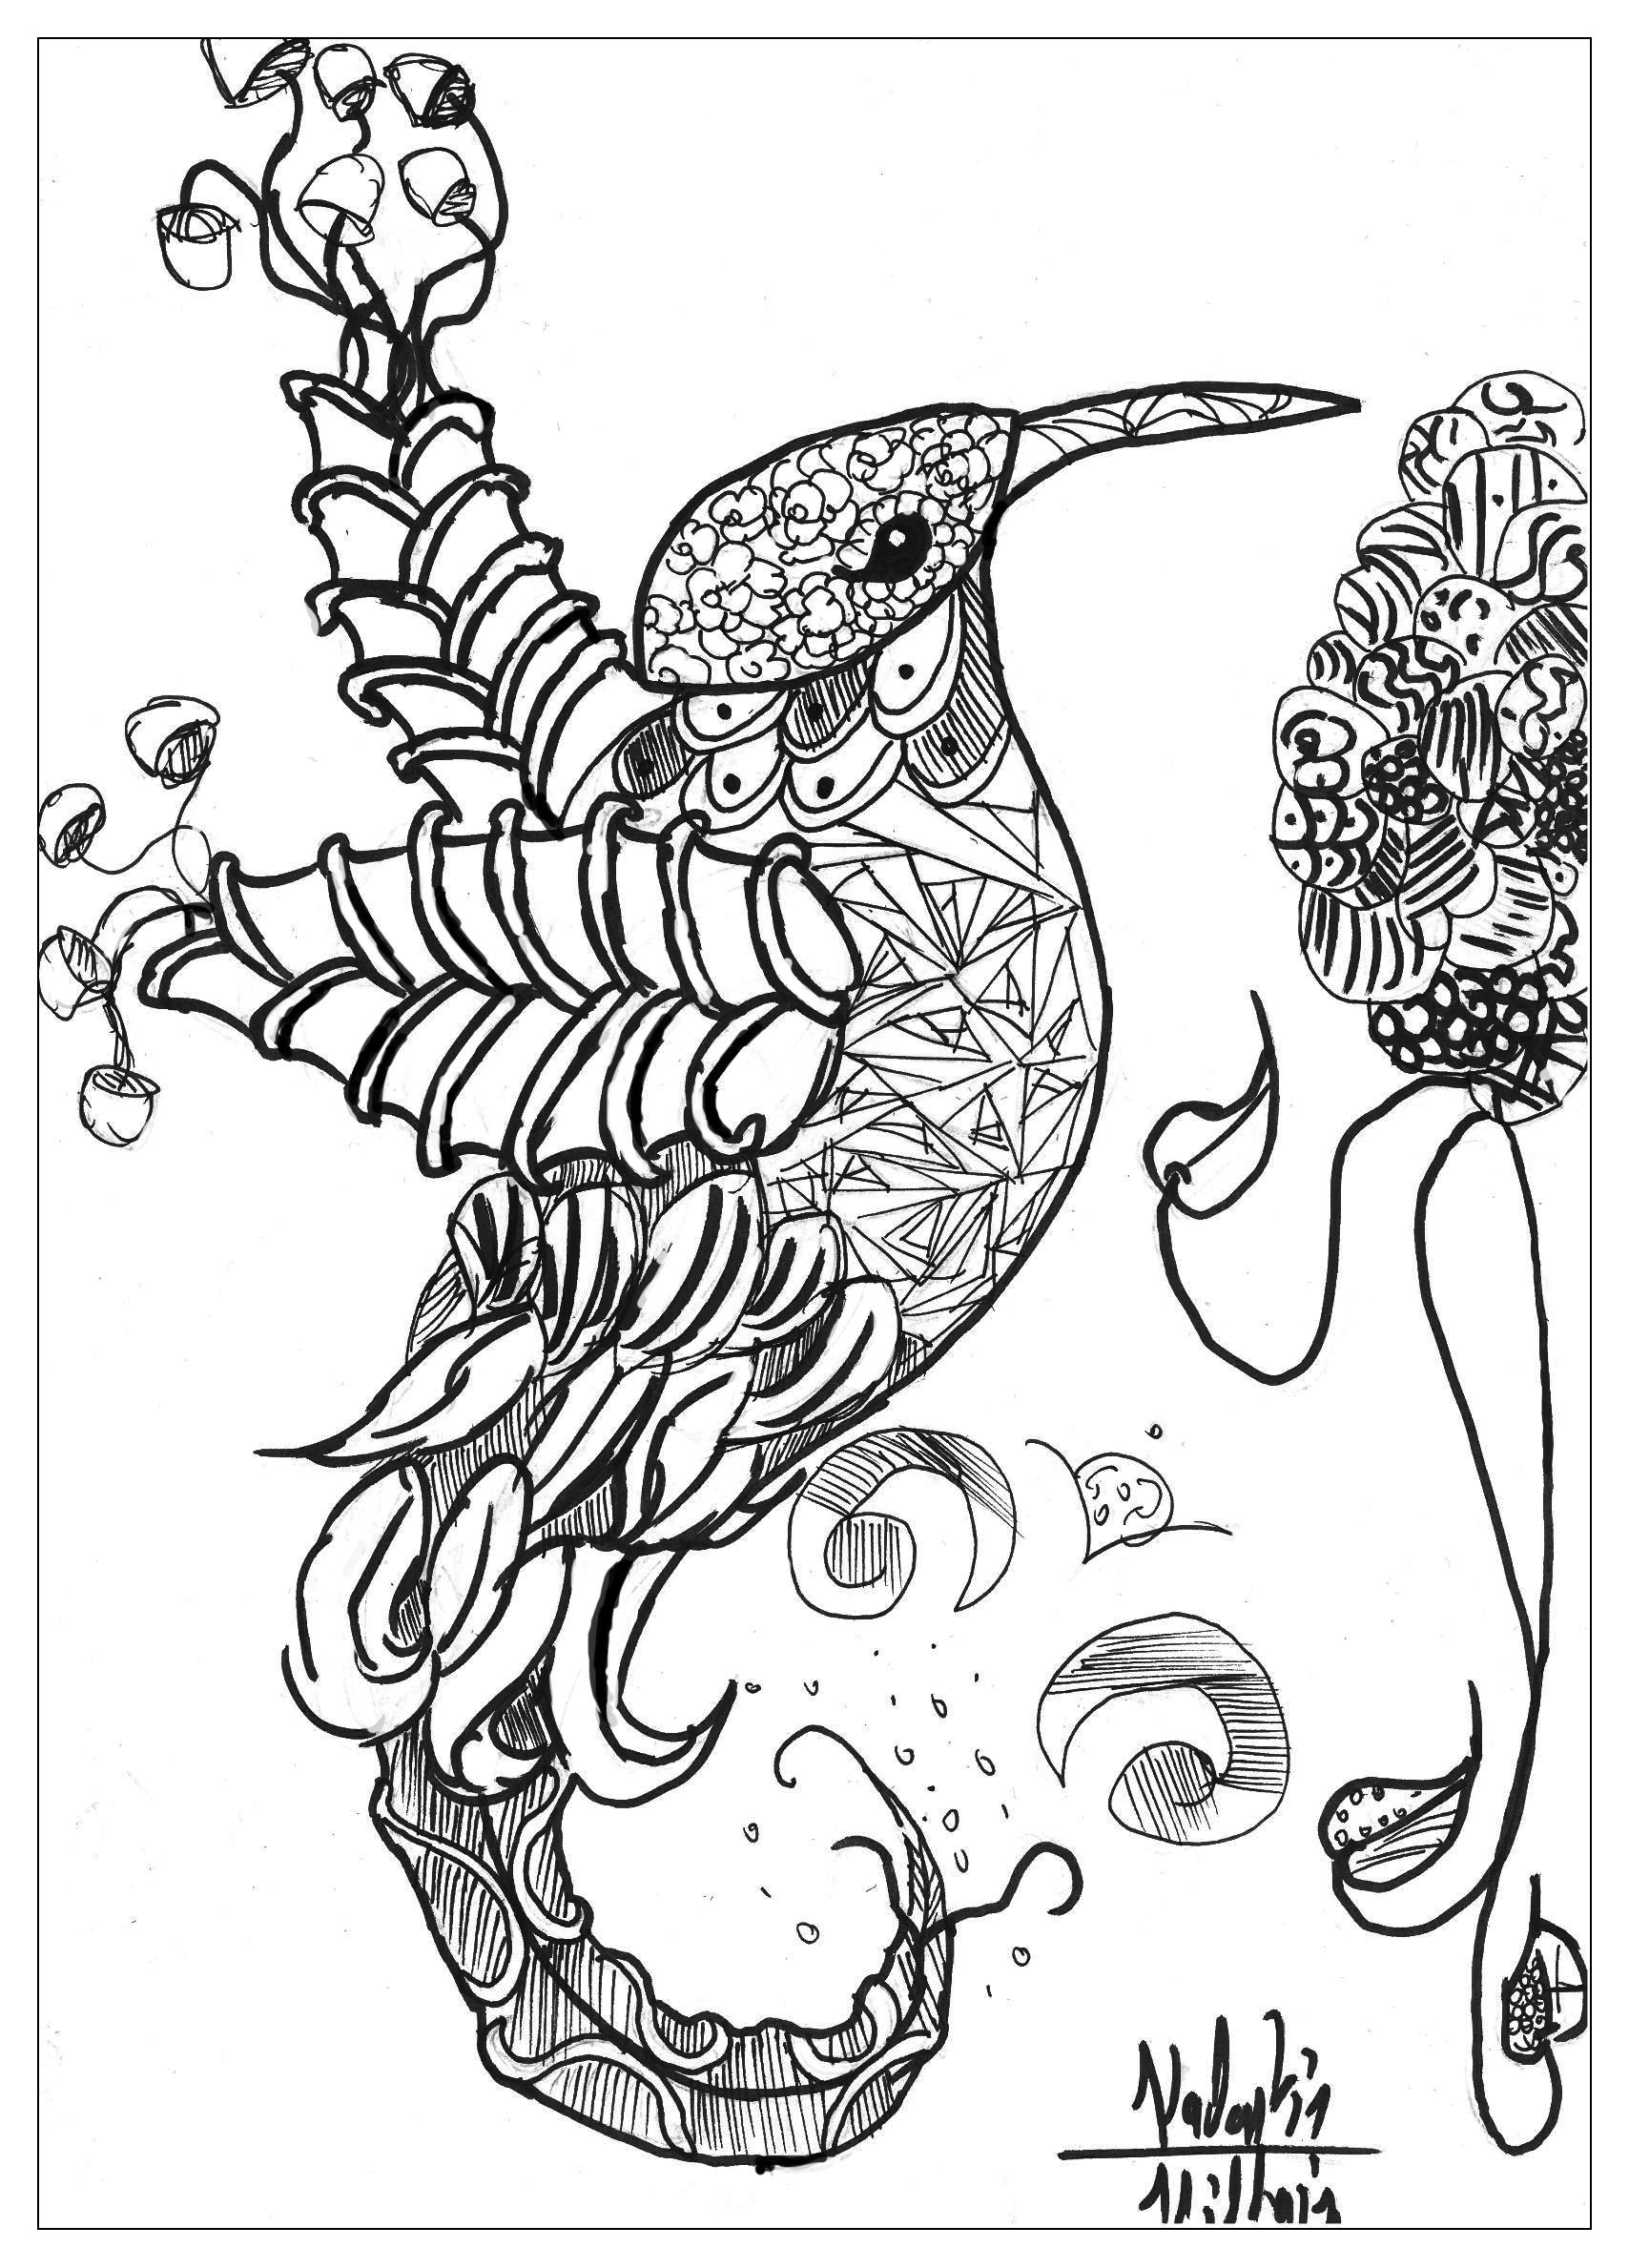 Download Animals bird valentin - Birds Adult Coloring Pages